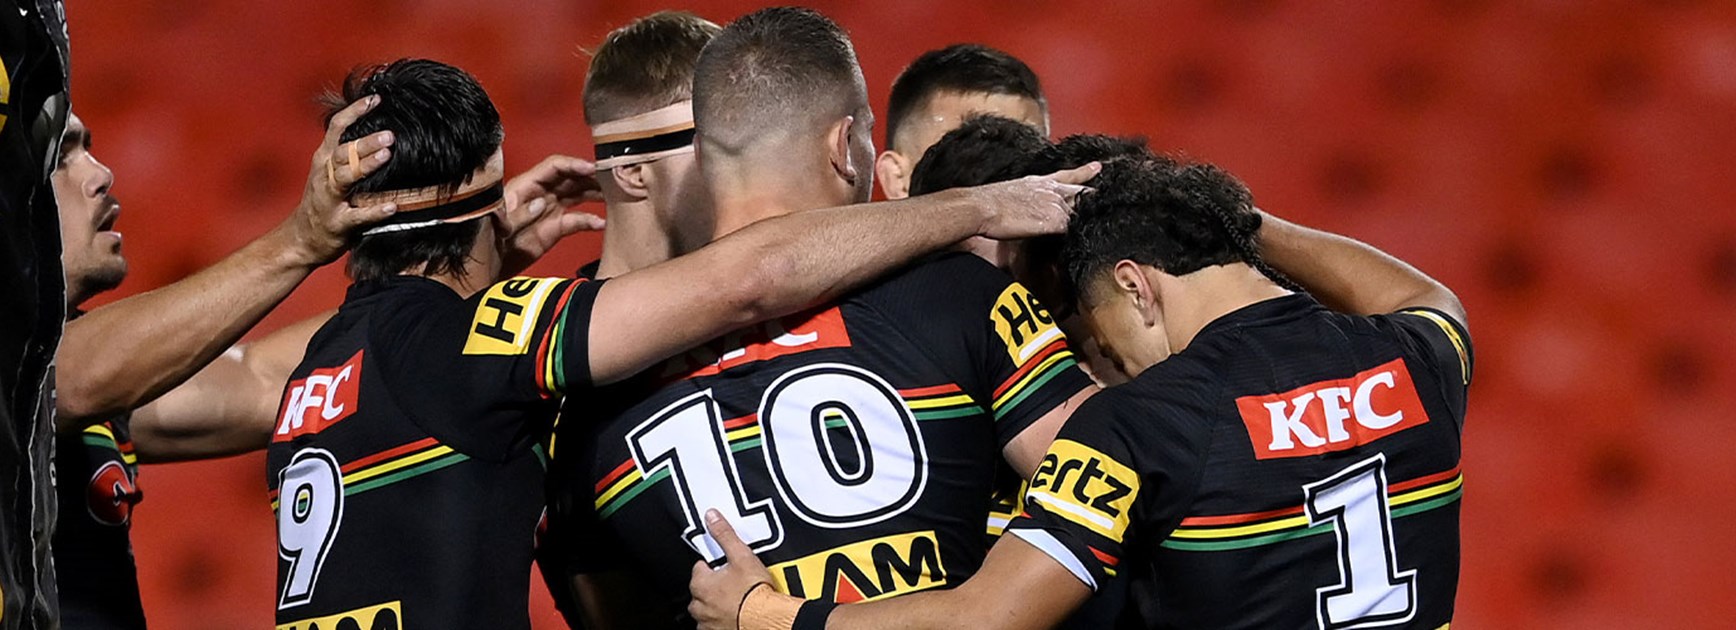 Panthers back to winning form in hard-fought Roosters clash